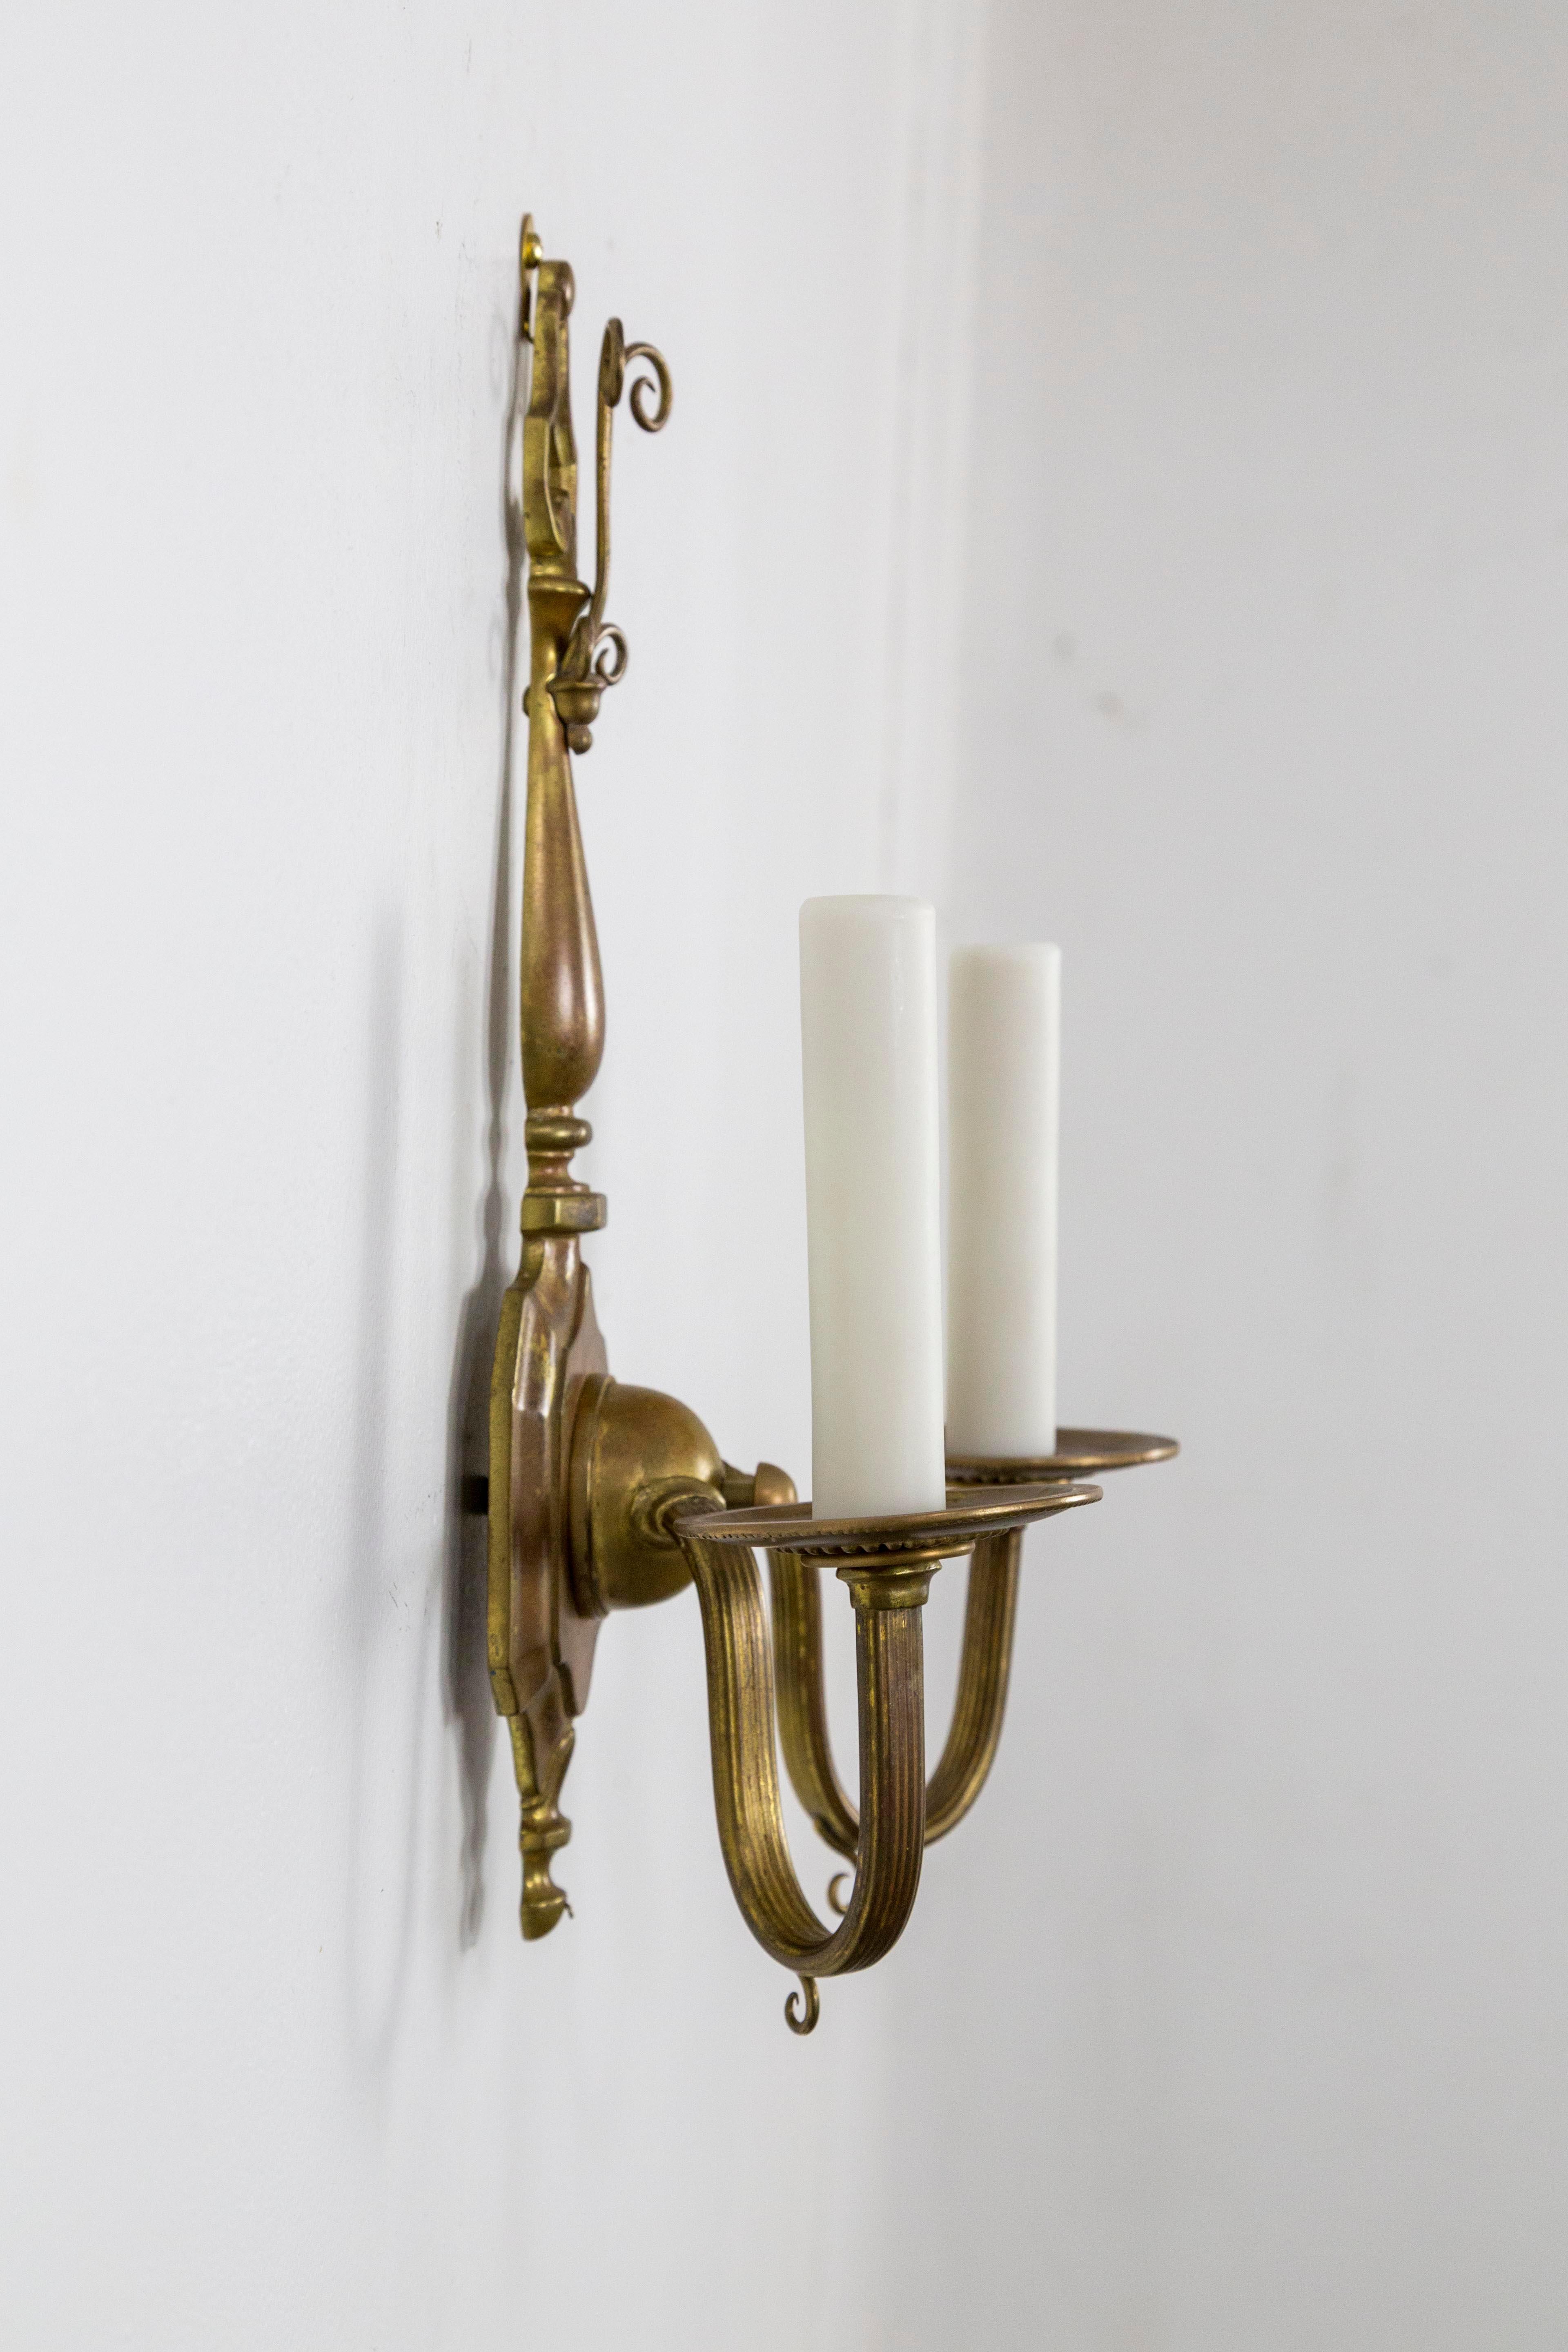 North American Colonial Revival 2-Light Brass Sconces 'Pair'